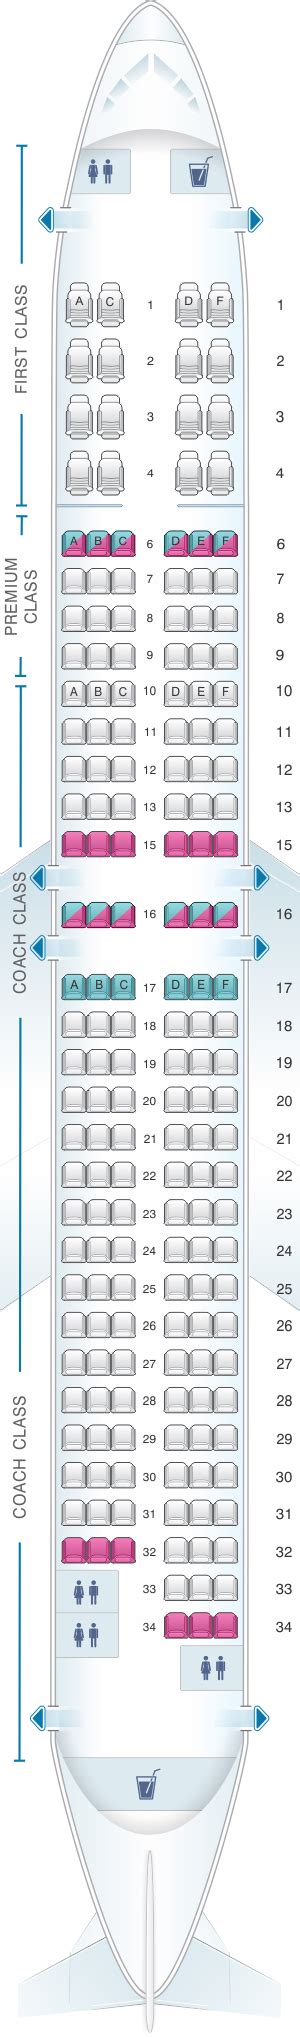 Boeing Seat Map Alaska Airlines Two Birds Home